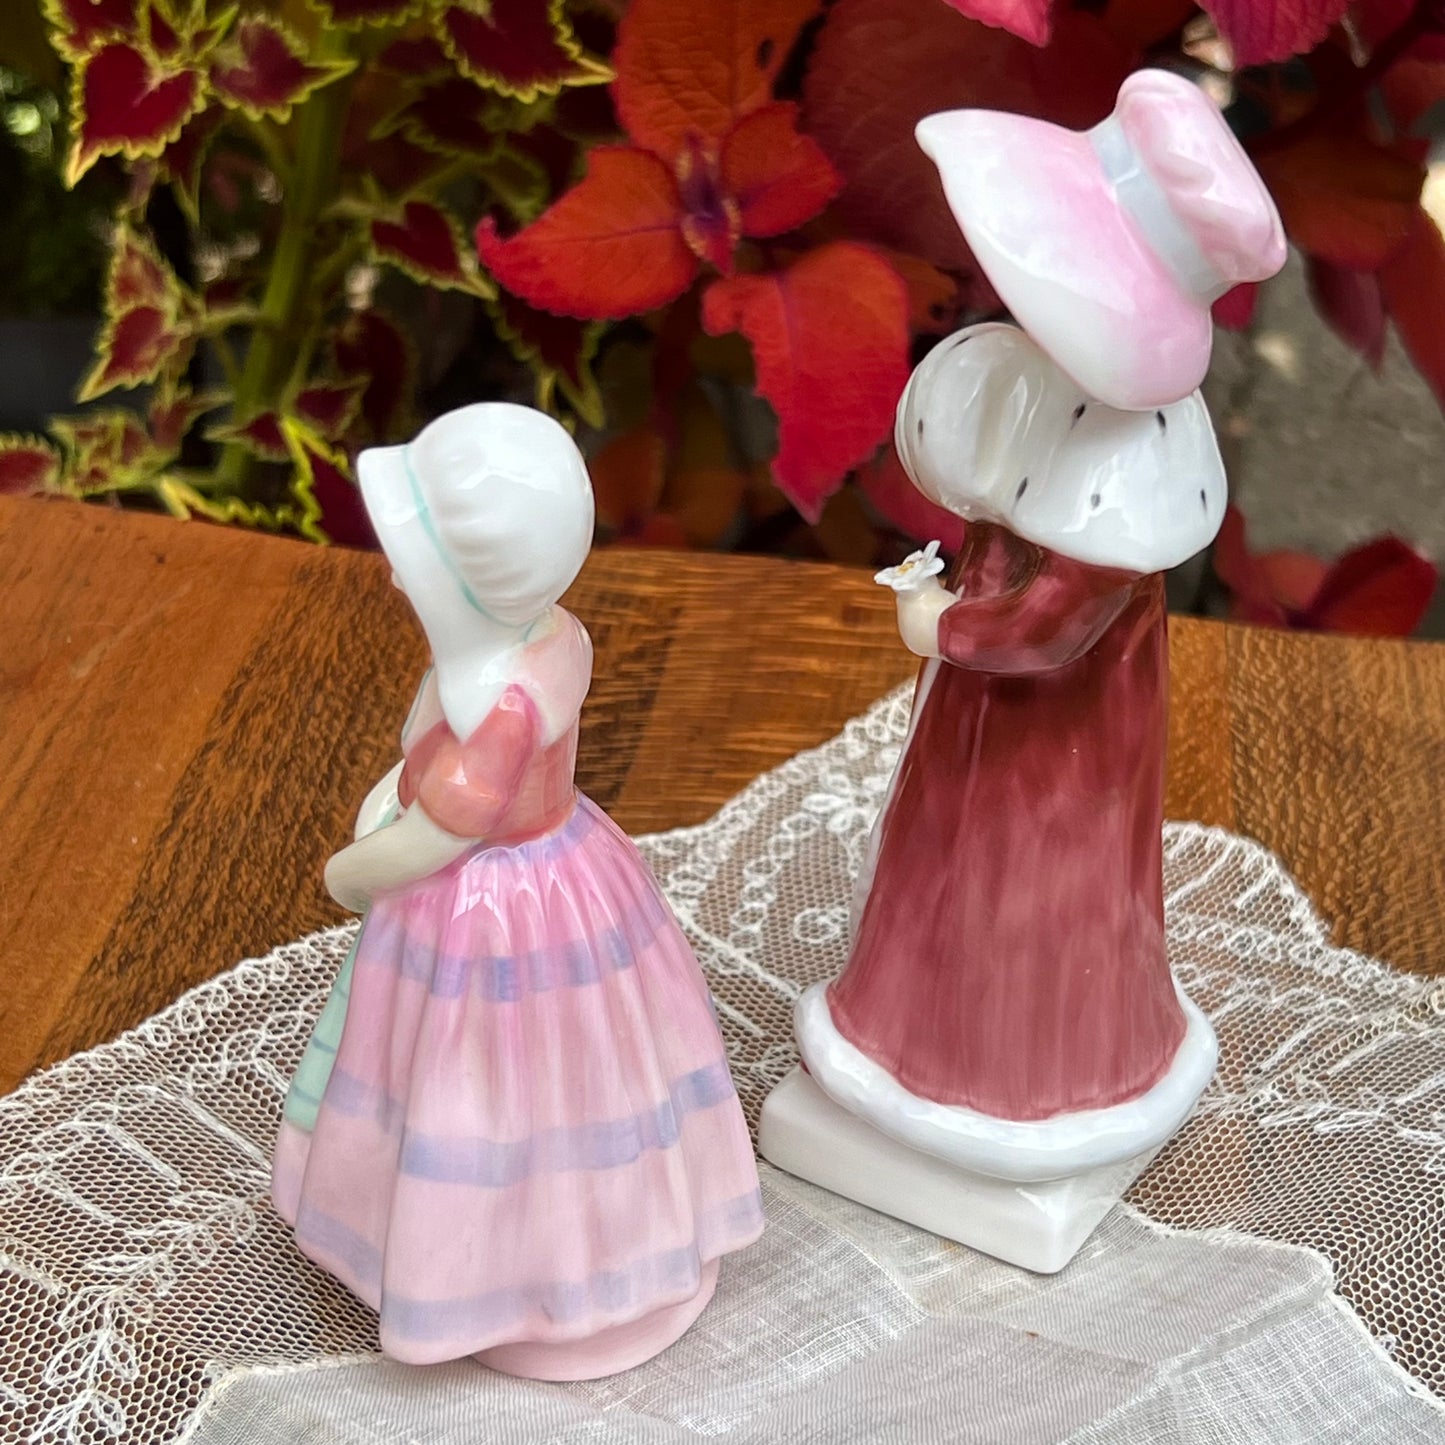 Two Vintage Royal Doulton Figurines "Tootles" HN1880 and "Sophie" HN2883